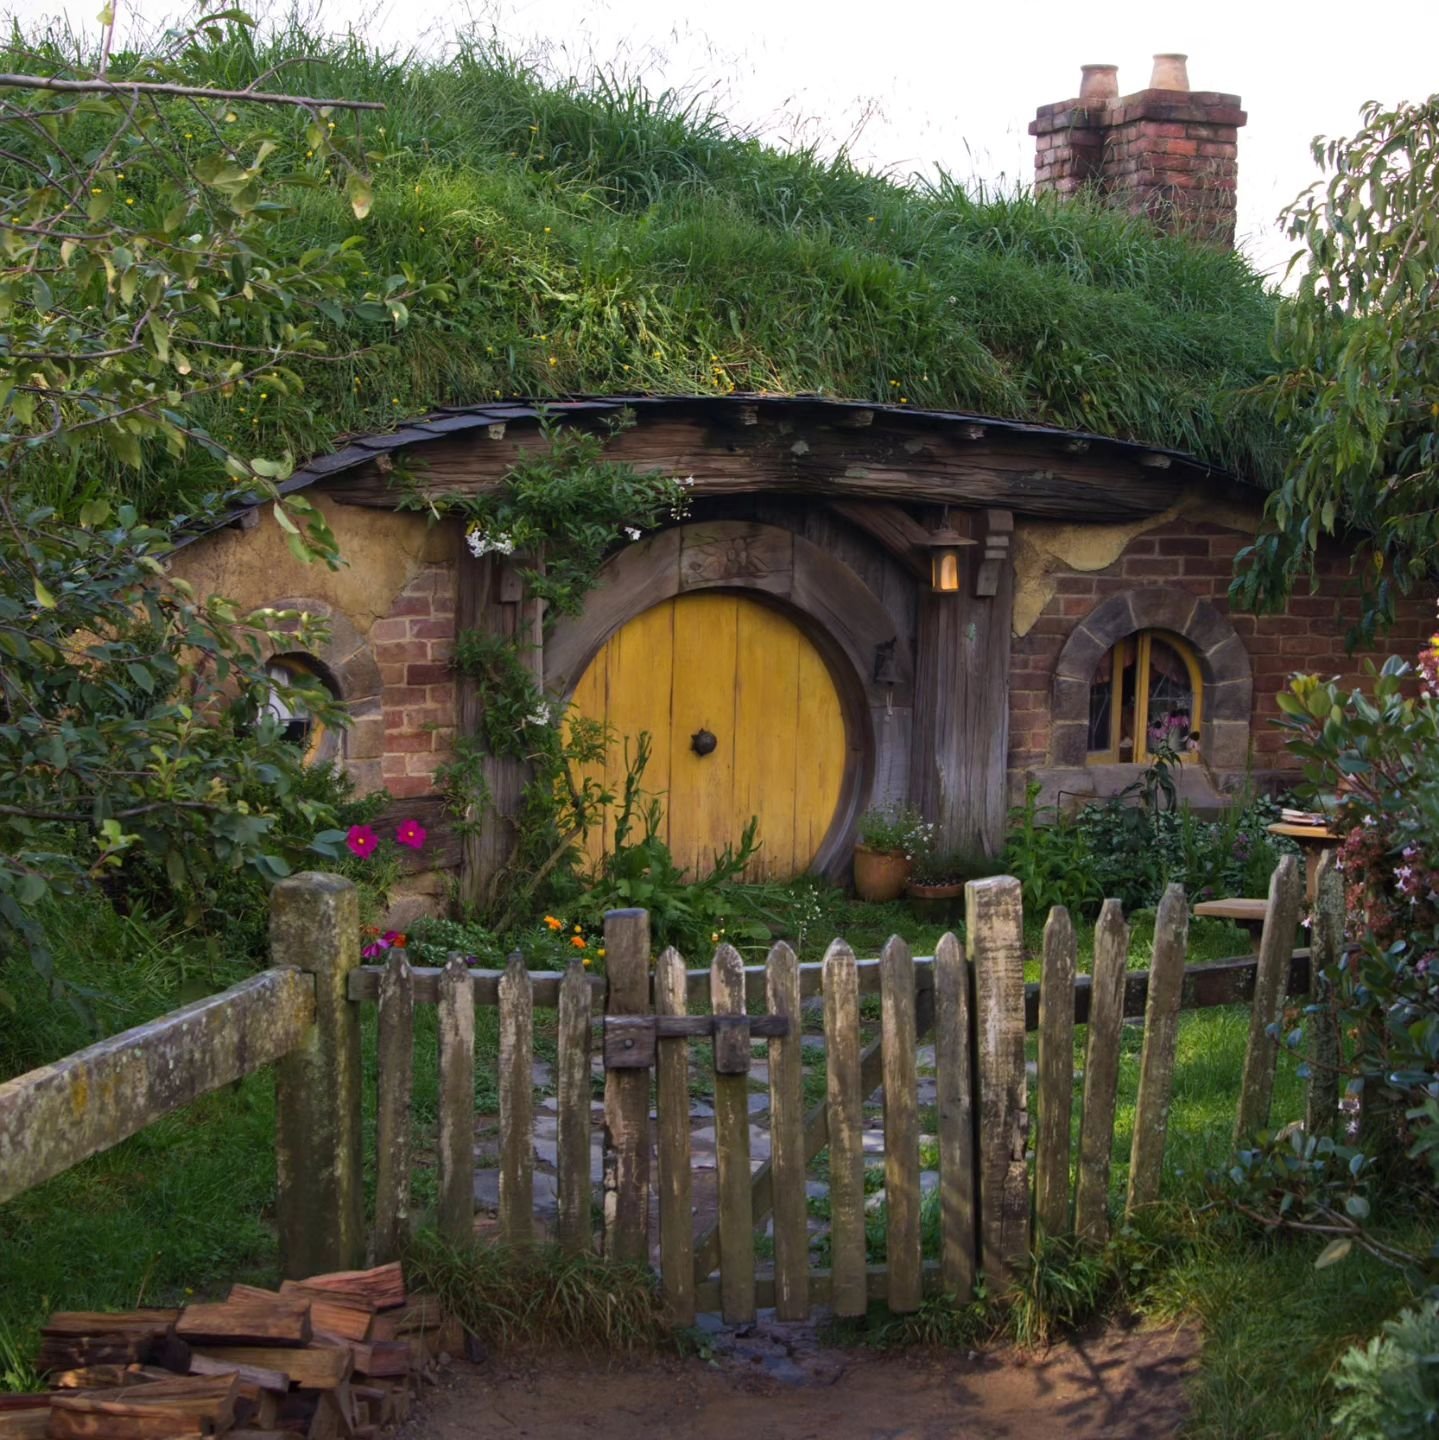 I recently found out that you can now tour INSIDE a Hobbit hole at the Hobbiton movie set in New Zealand, so basically I need to plan another trip back there ASAP.

#hobbiton #hobbitonmovieset #hobbitontours #hobbithole #newzealand #lotr #lordoftheri